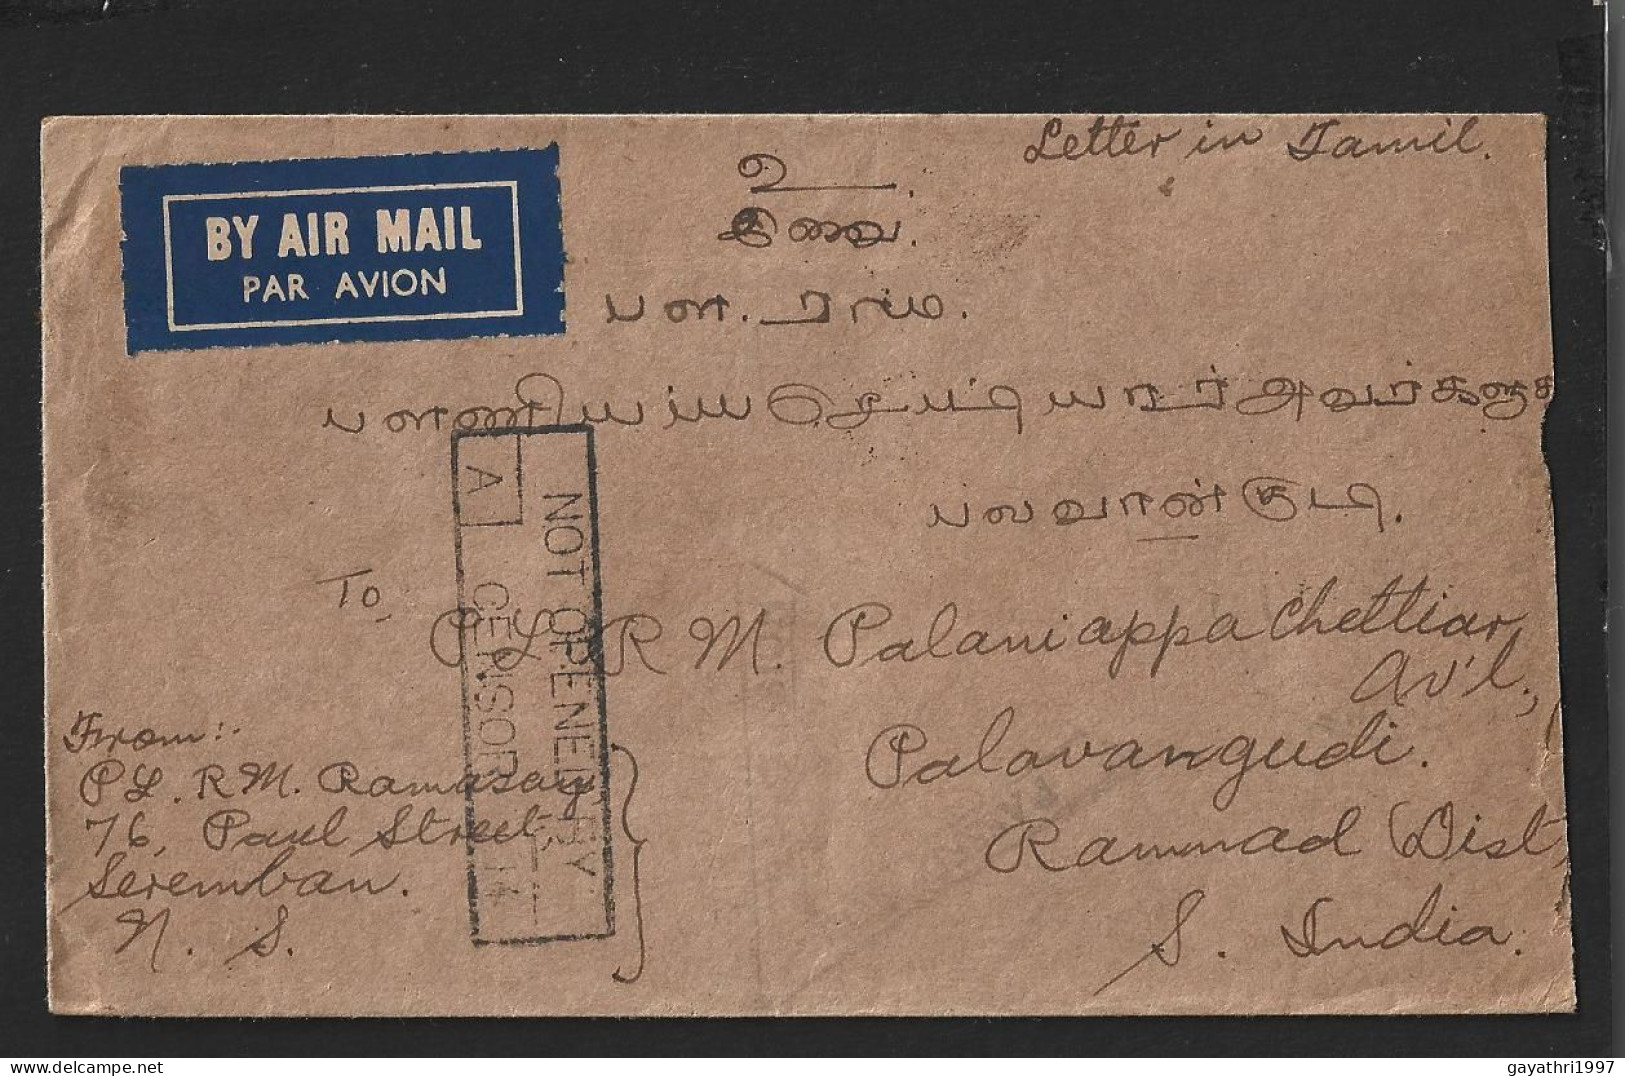 Malaya Negri Sembilan Stamps On Cover Seremban To India 1940 With Not Opened By Censor Cancellation (B62) - Negri Sembilan